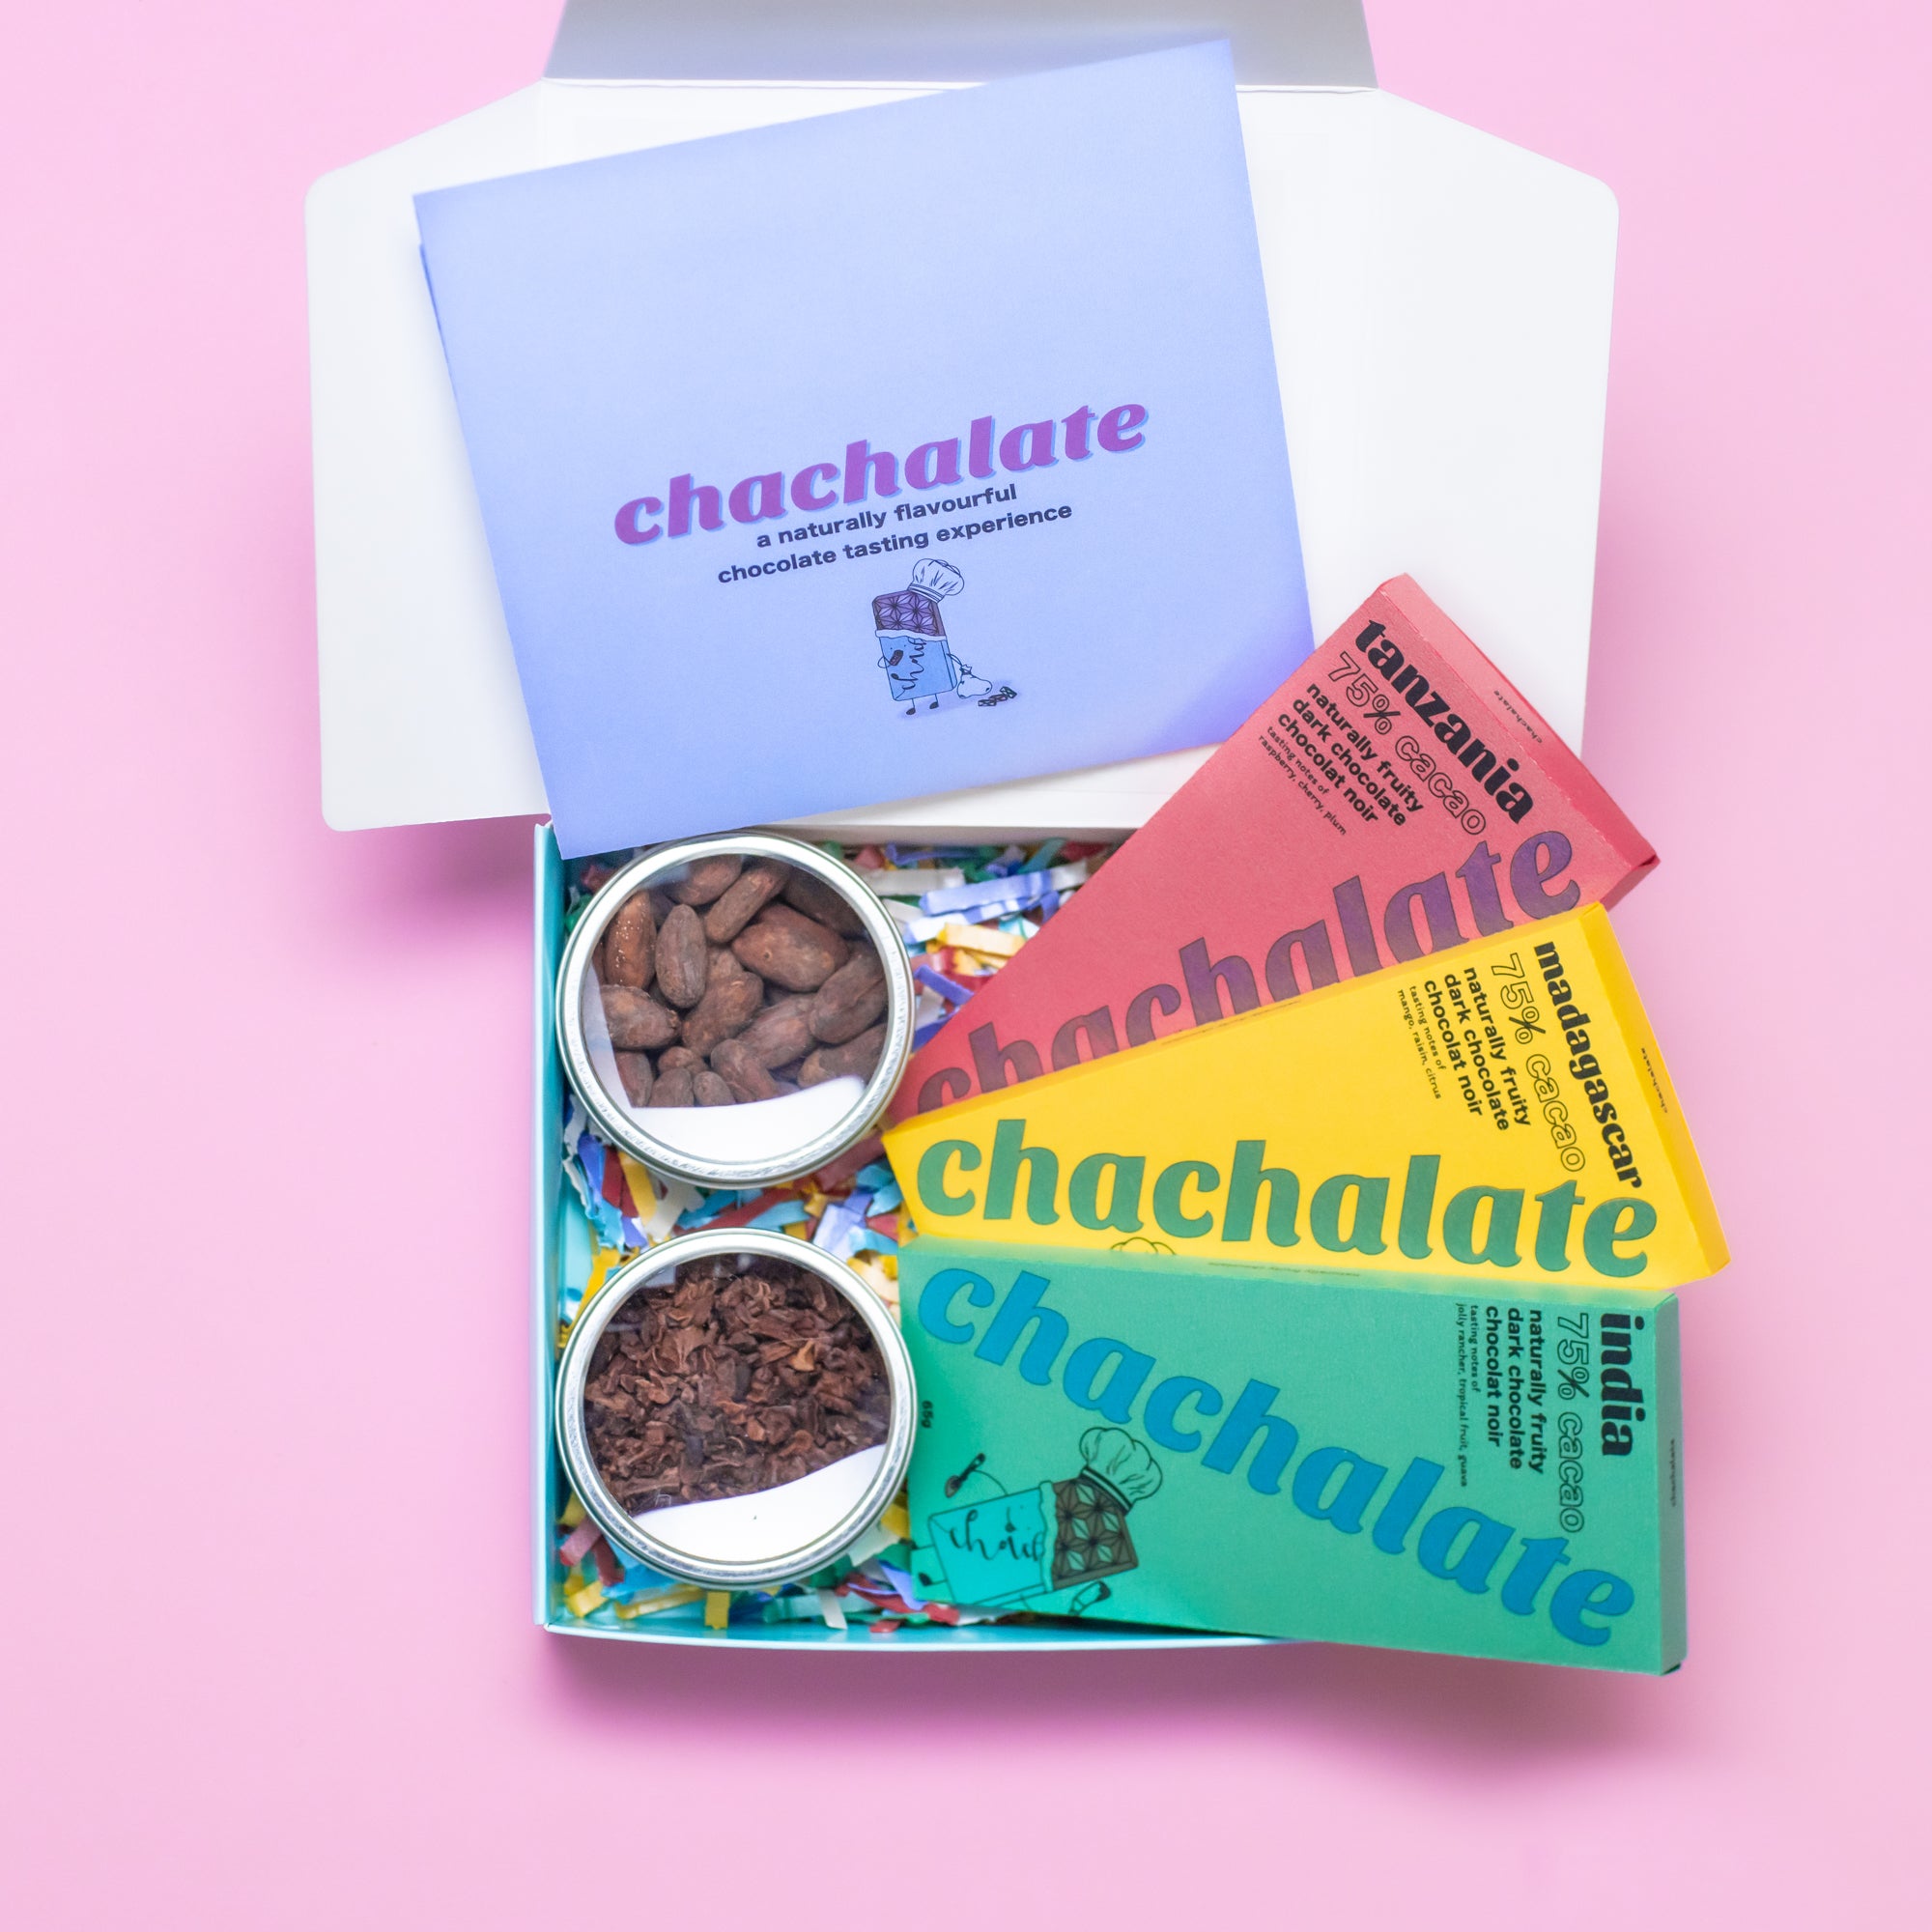 Virtual chocolate chachalate tasting kit. Book your team's online chocolate tasting and discover the world of real chocolate. Taste three single-origin bars made with only cocoa beans and organic cane sugar.